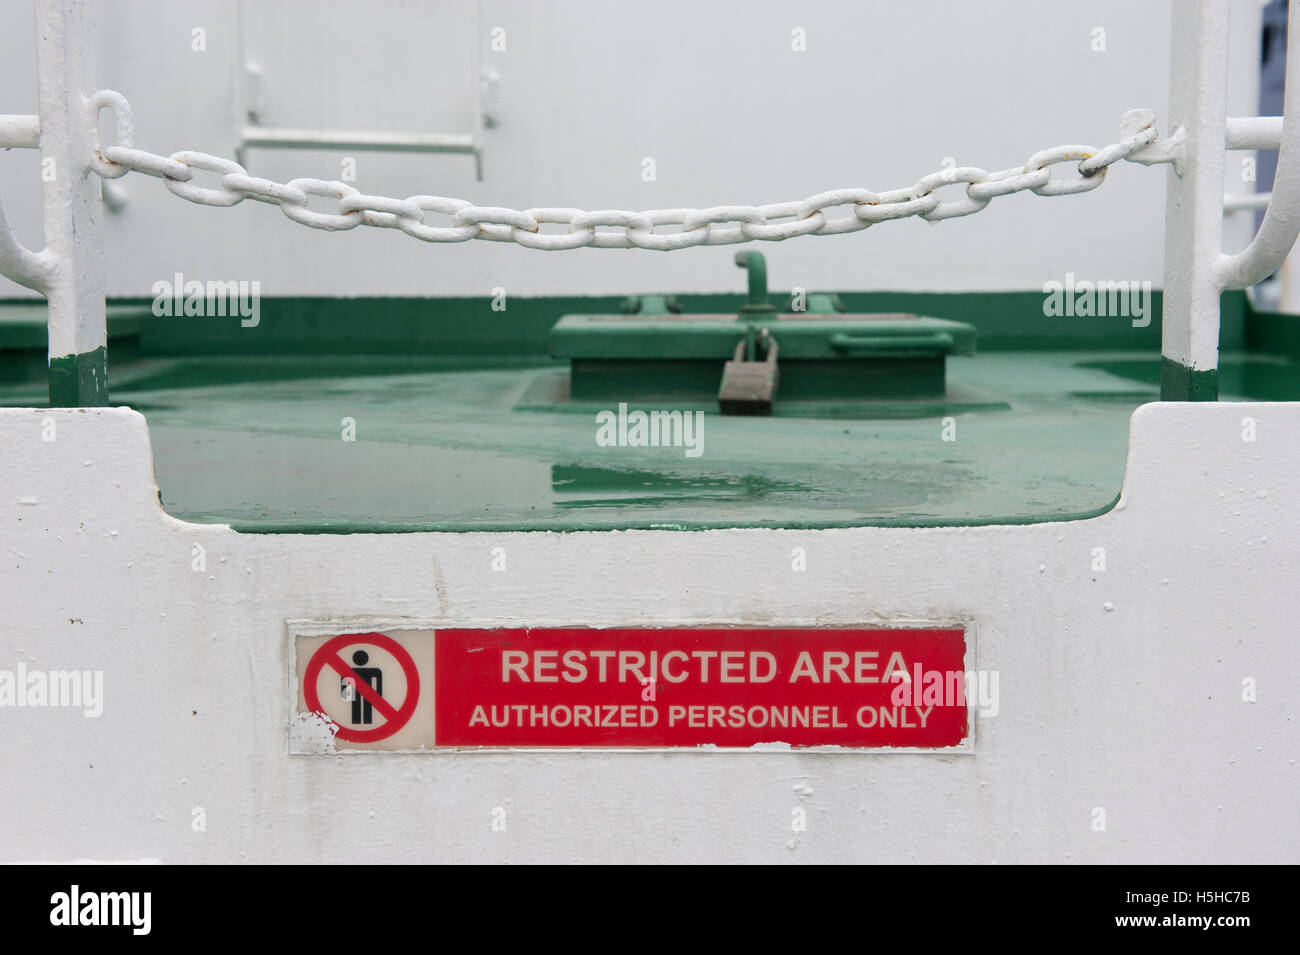 Restricted area warning sign on board a container ship Stock Photo